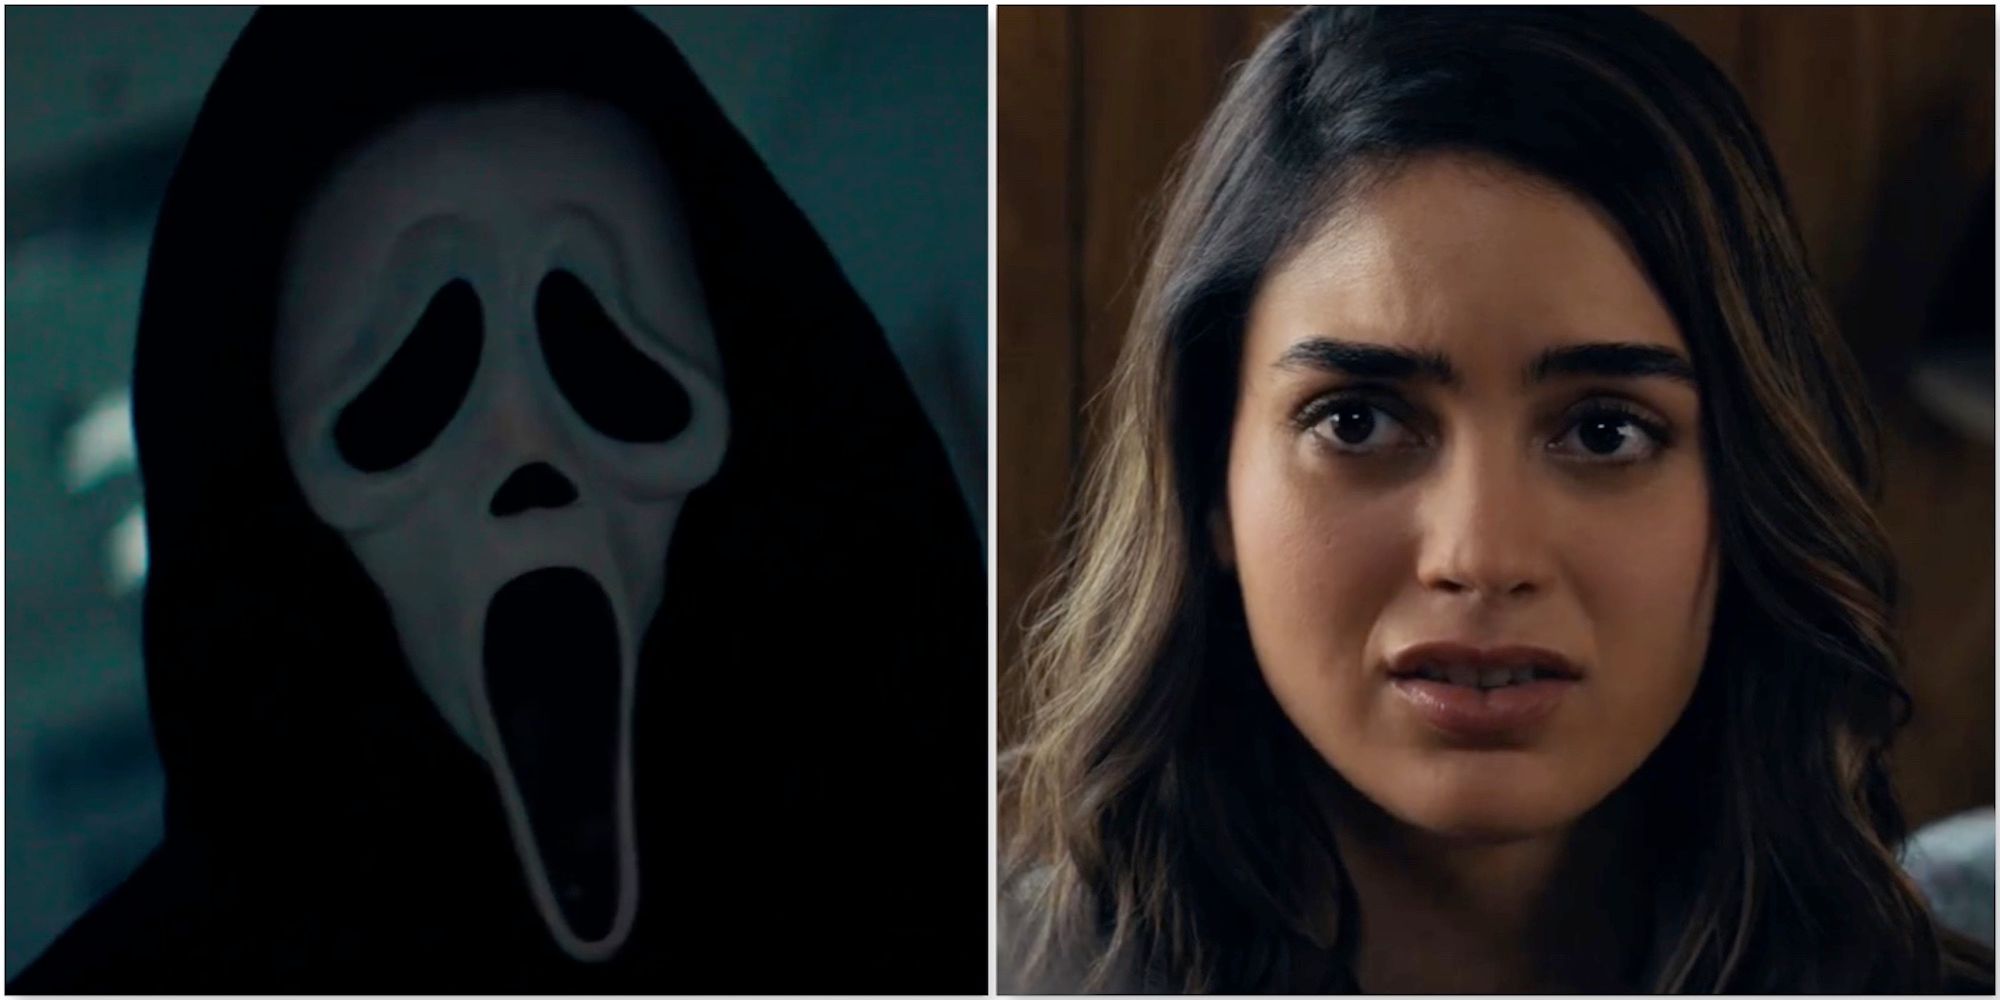 A Ghostface and Sam from Scream 5